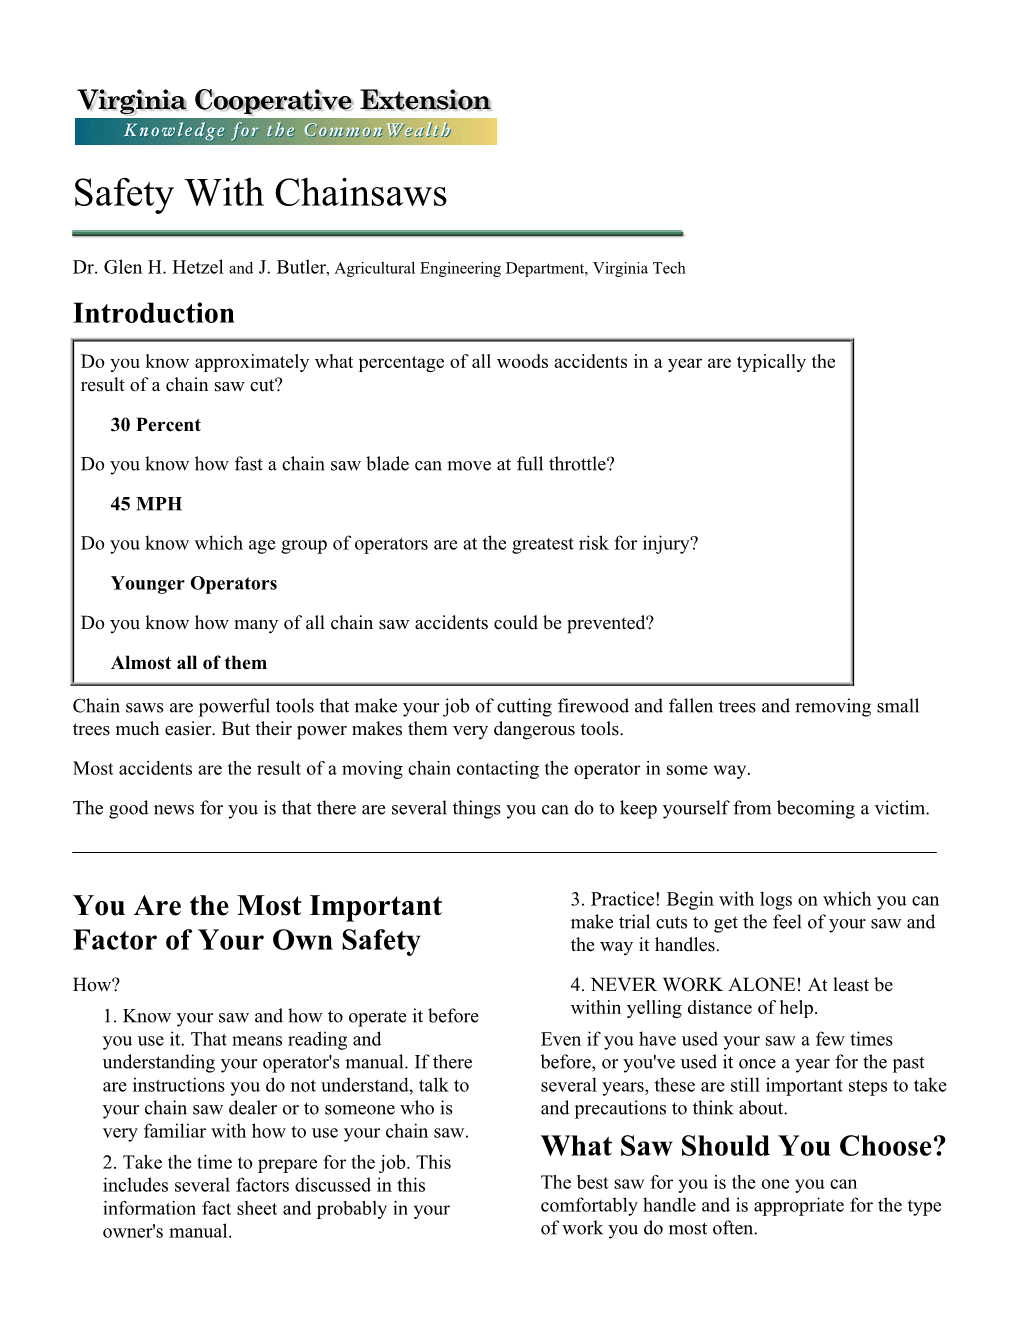 Safety with Chainsaws